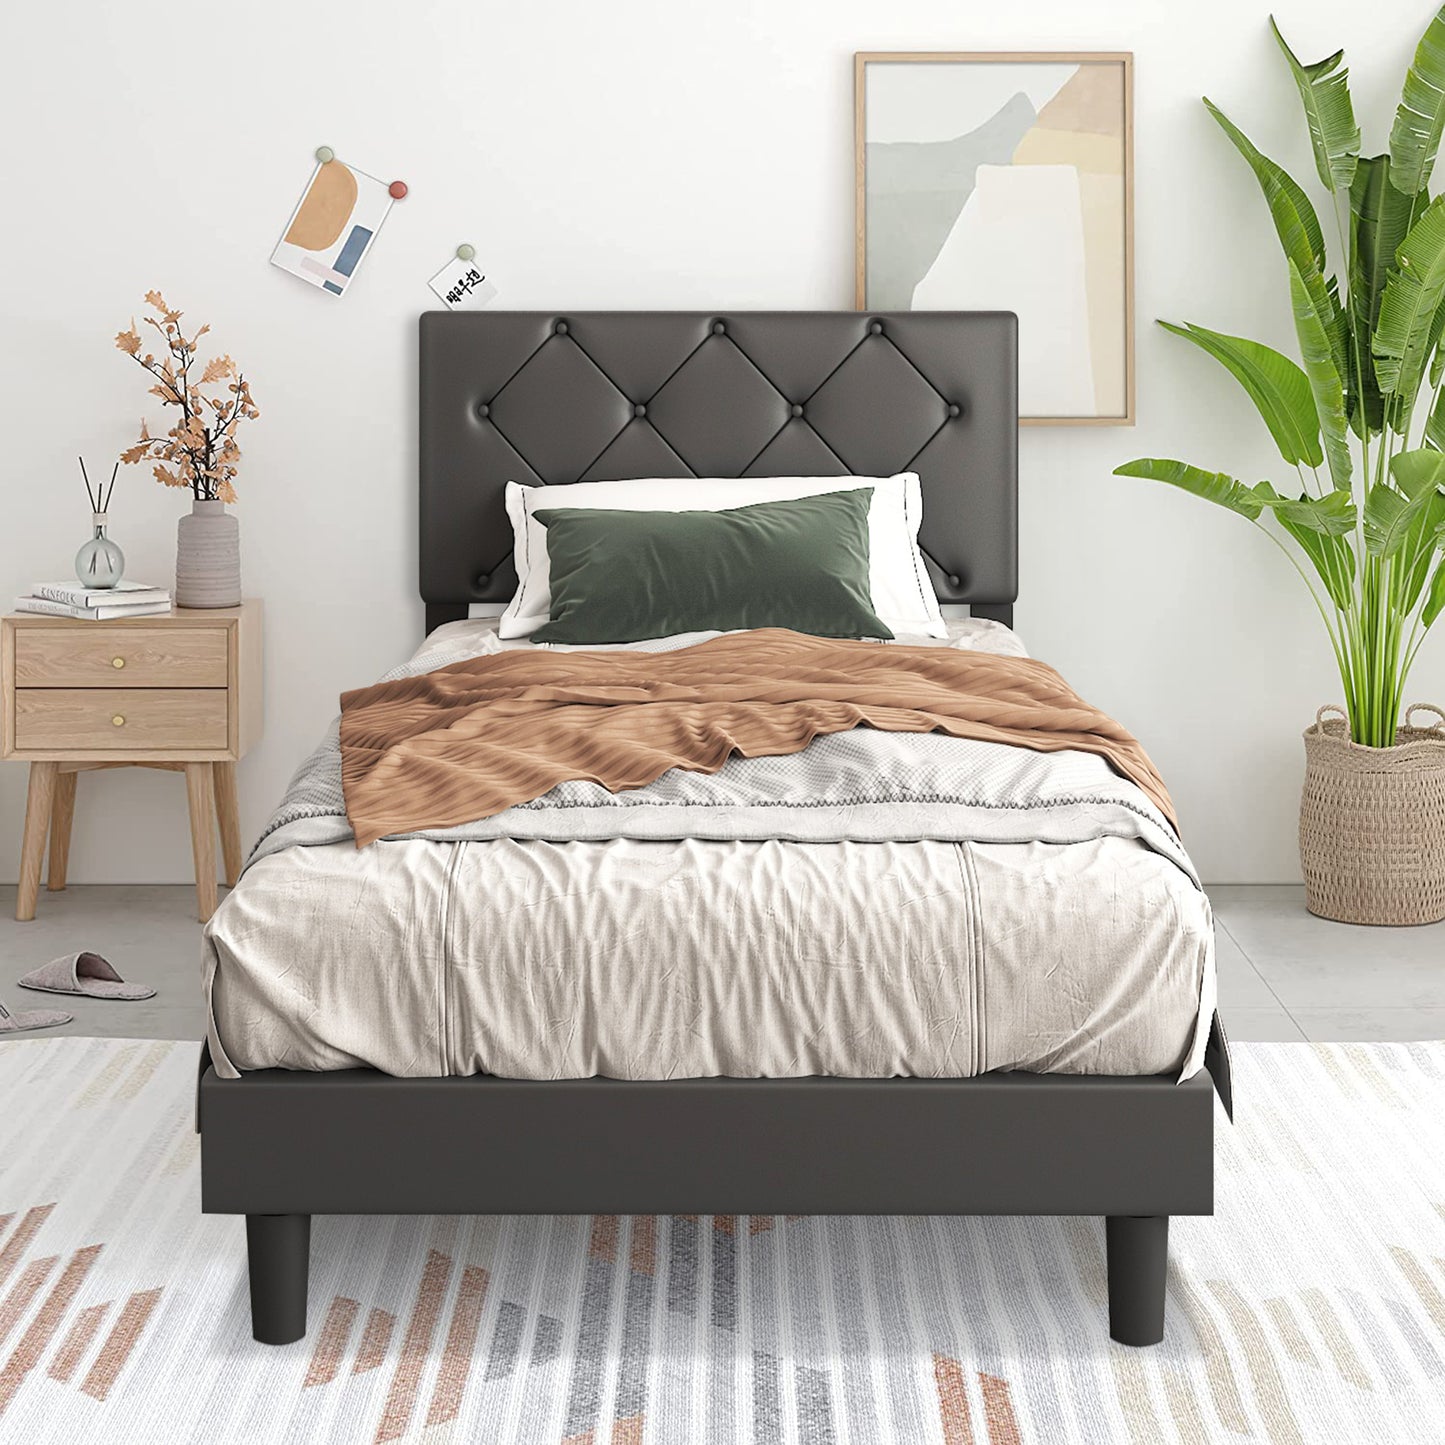 SYNGAR Faux Leather Upholstered Platform Bed Frame with Height Adjustable Headboard, Queen Size Metal Bed with Wood Support for Kids Teens Adults, No Box Spring Needed, 550LBS Load Capacity, Black